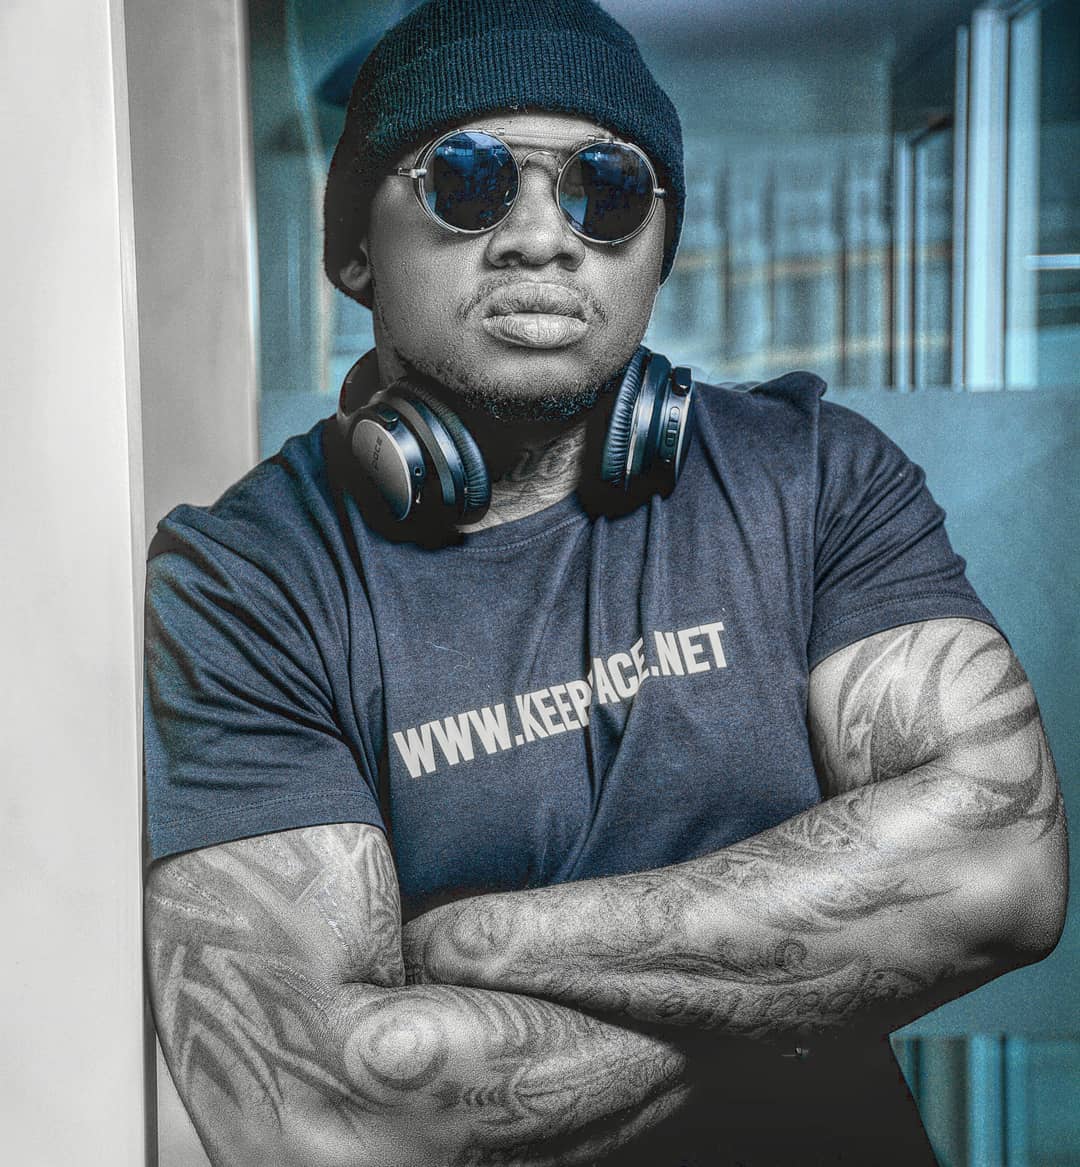 Khaligraph Jones: I can’t date a slay queen, these are the basic qualities i’d look for in a woman